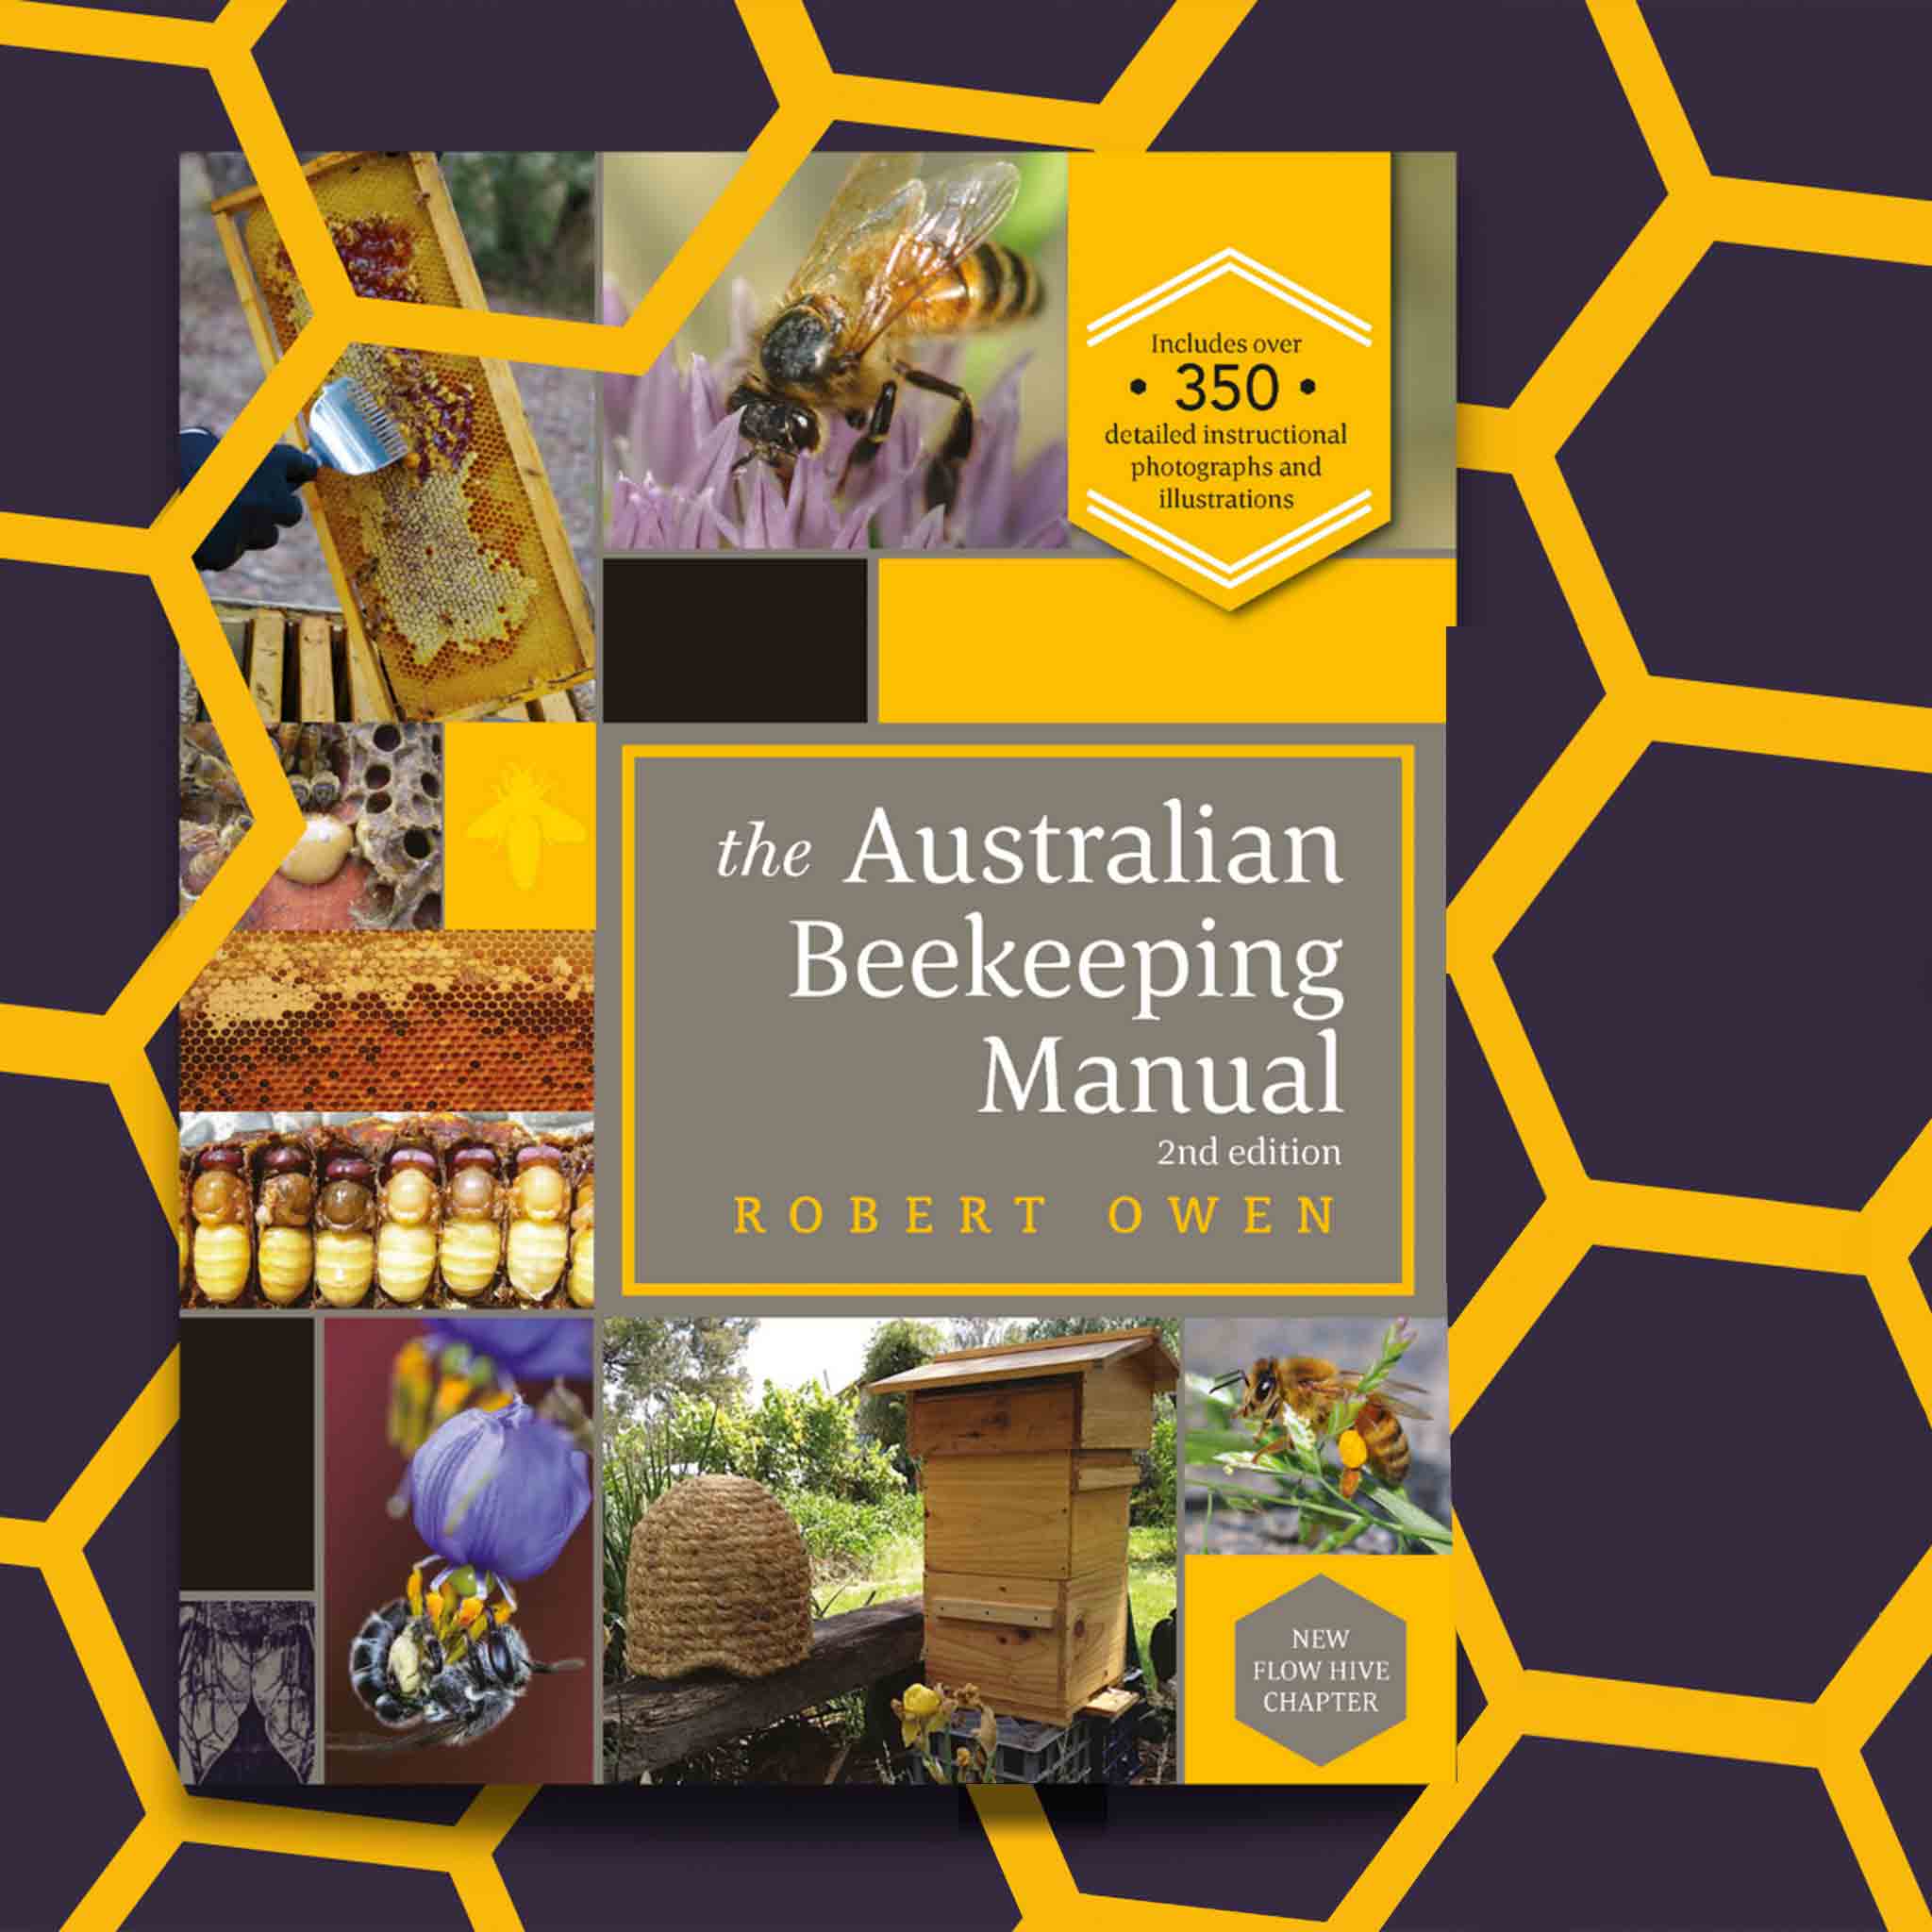 The Australian Beekeeping Manual - Latest 2nd edition (author Robert Owen) - Books collection by Buzzbee Beekeeping Supplies